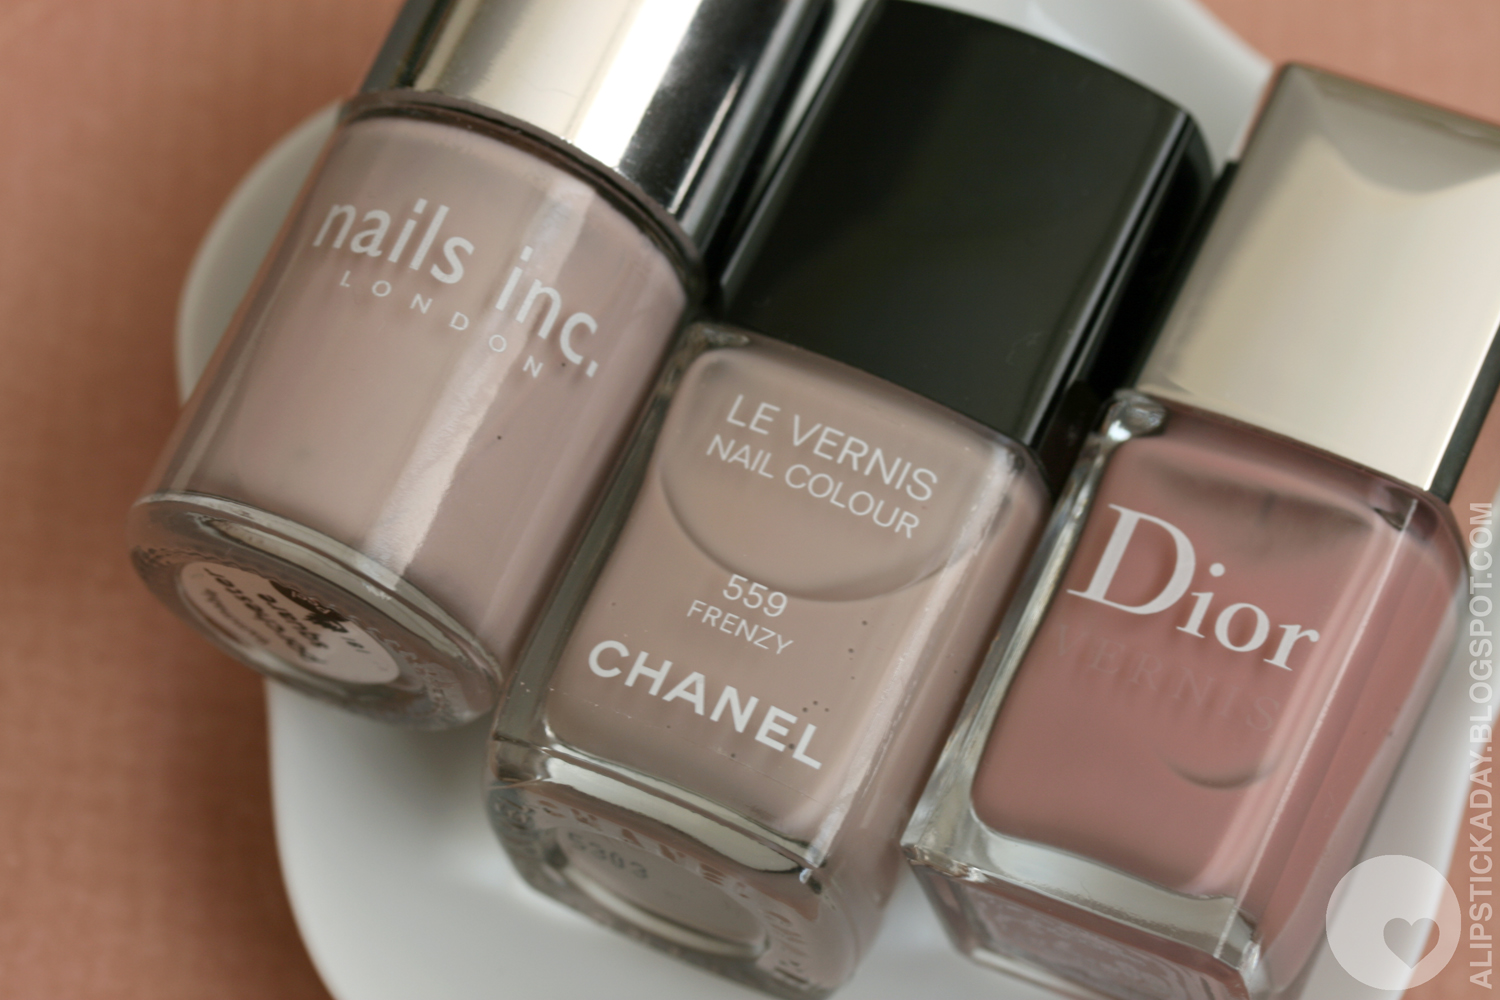 Chanel Le Vernis Longwear Nail Colour in Frenzy - wide 7